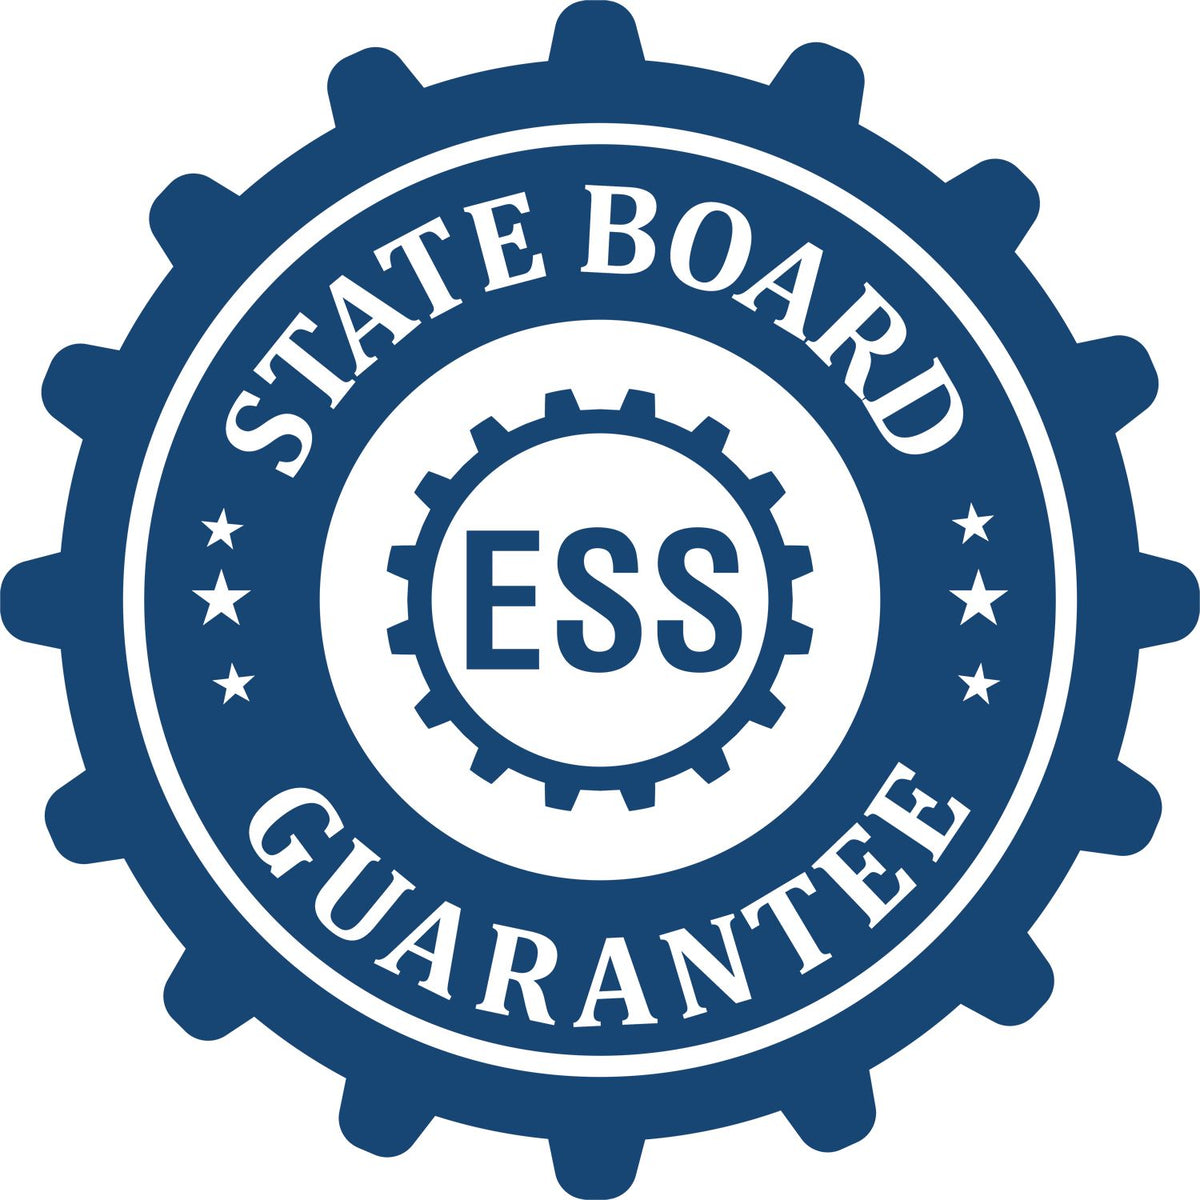 An emblem in a gear shape illustrating a state board guarantee for the Digital Wyoming Landscape Architect Stamp product.